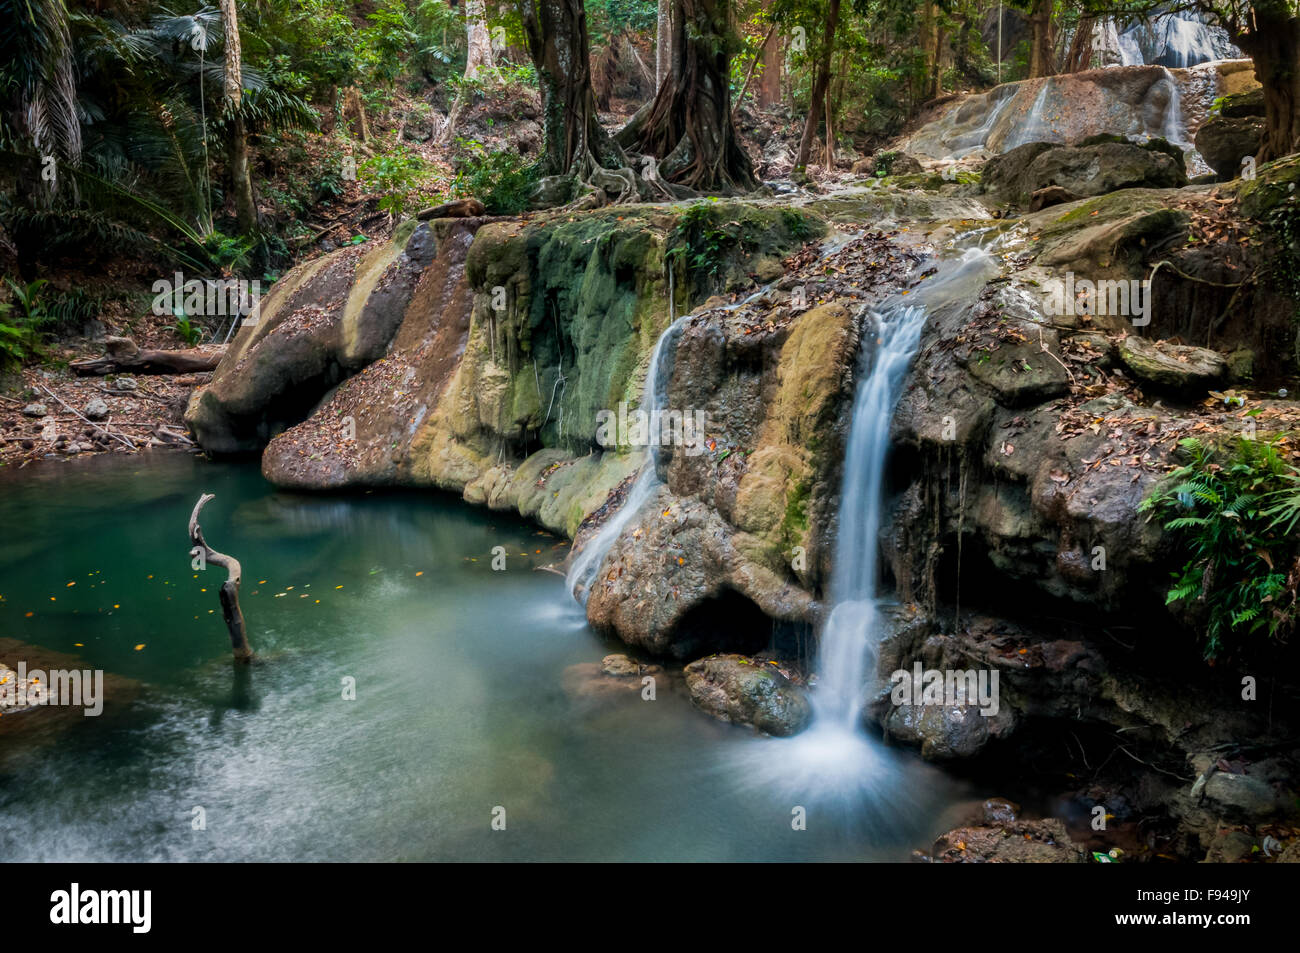 Waterfalls surrounded by forest in Oenesu near Kupang, East Nusa Tenggara, Indonesia. Stock Photo